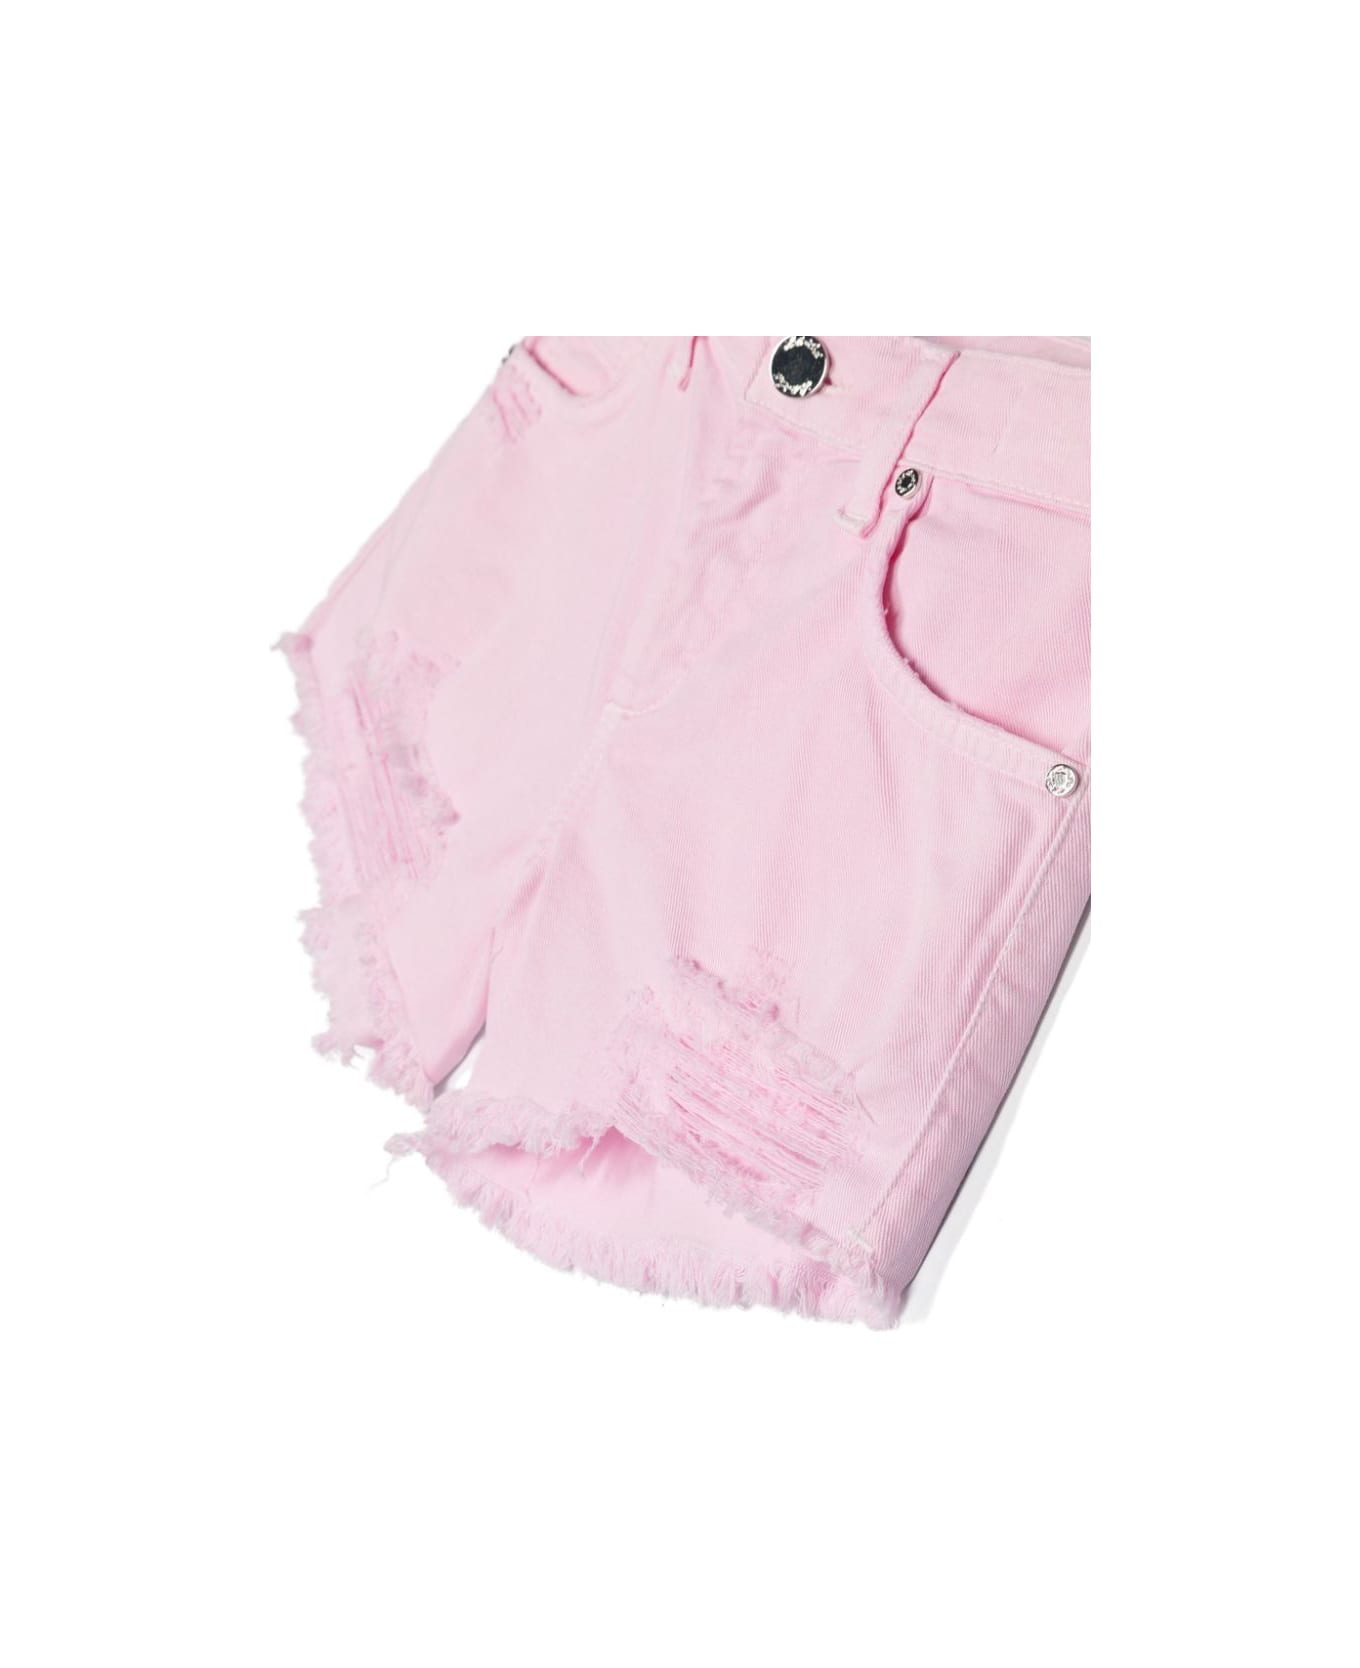 Miss Grant Shorts Con Strappi - Pink